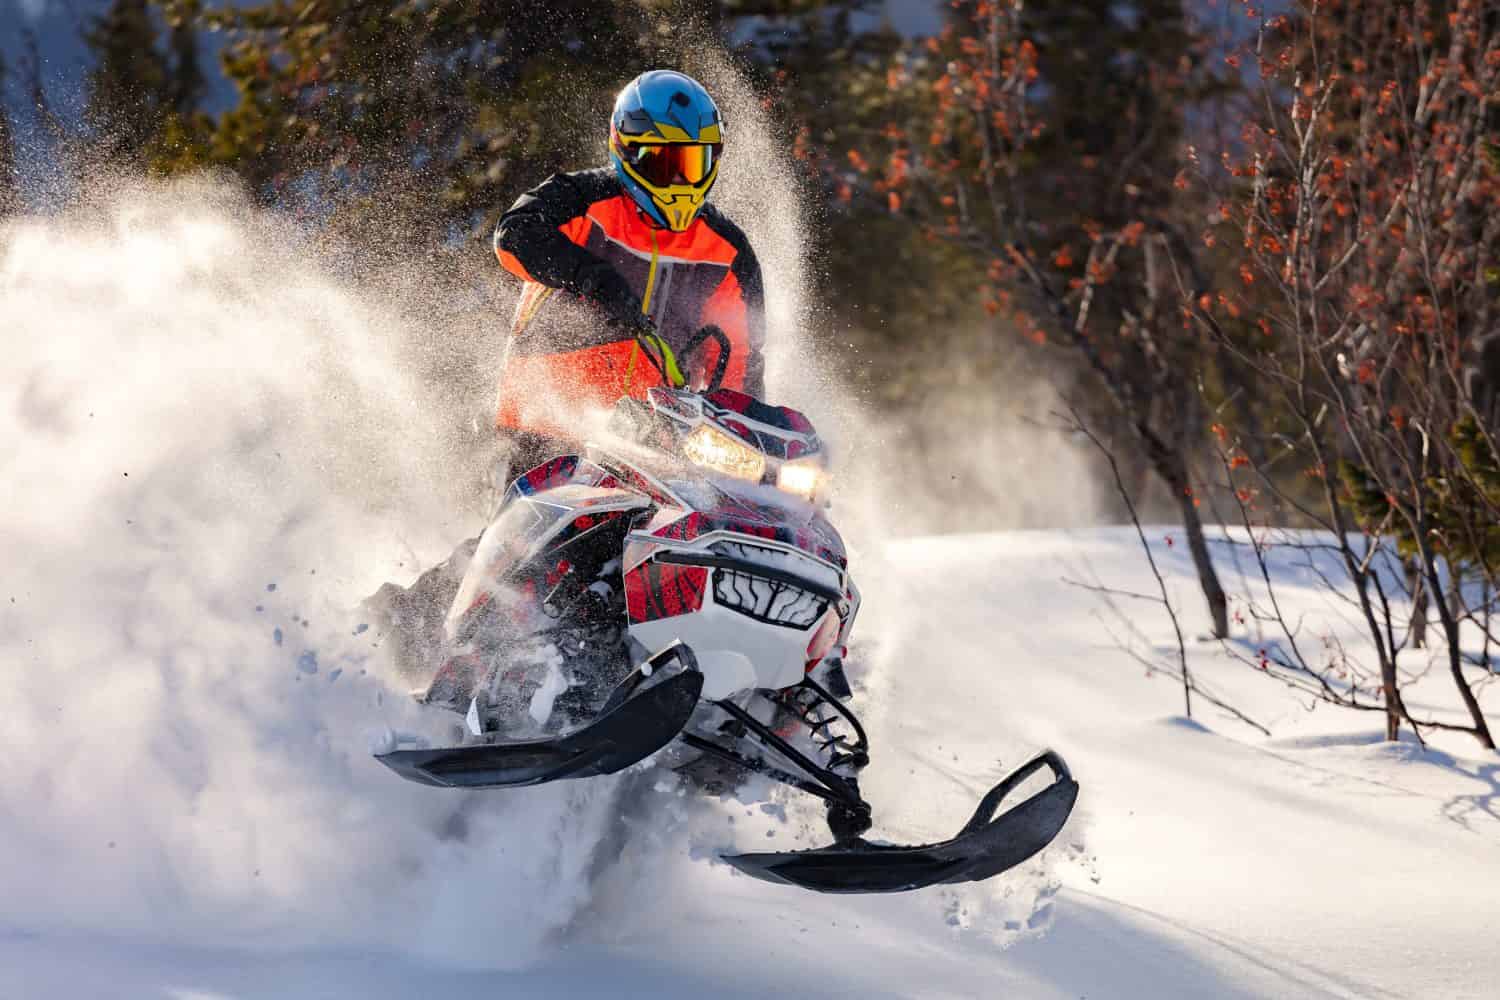 <p>One of the great benefits of this winter activity is its learning curve. Unlike skiing, even those unfamiliar with snowmobiling can enjoy it–making it a favorite pastime for vacationers, novices, and out-of-towners. No matter your age or skill level, snowmobiling is fun for everyone.</p>    <p>So, if you're a seasoned snowbird or interested in new experiences, this motorsport is for you. And if you do it, why not do it in the best place in the world to snowmobile? Read on to learn more about Eagle River, Wisconsin – the Snowmobile Capital of the World.</p>    <p>Eagle River beckons you this winter!</p><p>Sharks, lions, alligators, and more! Don’t miss today’s latest and most exciting animal news. <strong><a href="https://www.msn.com/en-us/channel/source/AZ%20Animals%20US/sr-vid-7etr9q8xun6k6508c3nufaum0de3dqktiq6h27ddeagnfug30wka">Click here to access the A-Z Animals profile page</a> and be sure to hit the <em>Follow</em> button here or at the top of this article!</strong></p> <p>Have feedback? Add a comment below!</p>